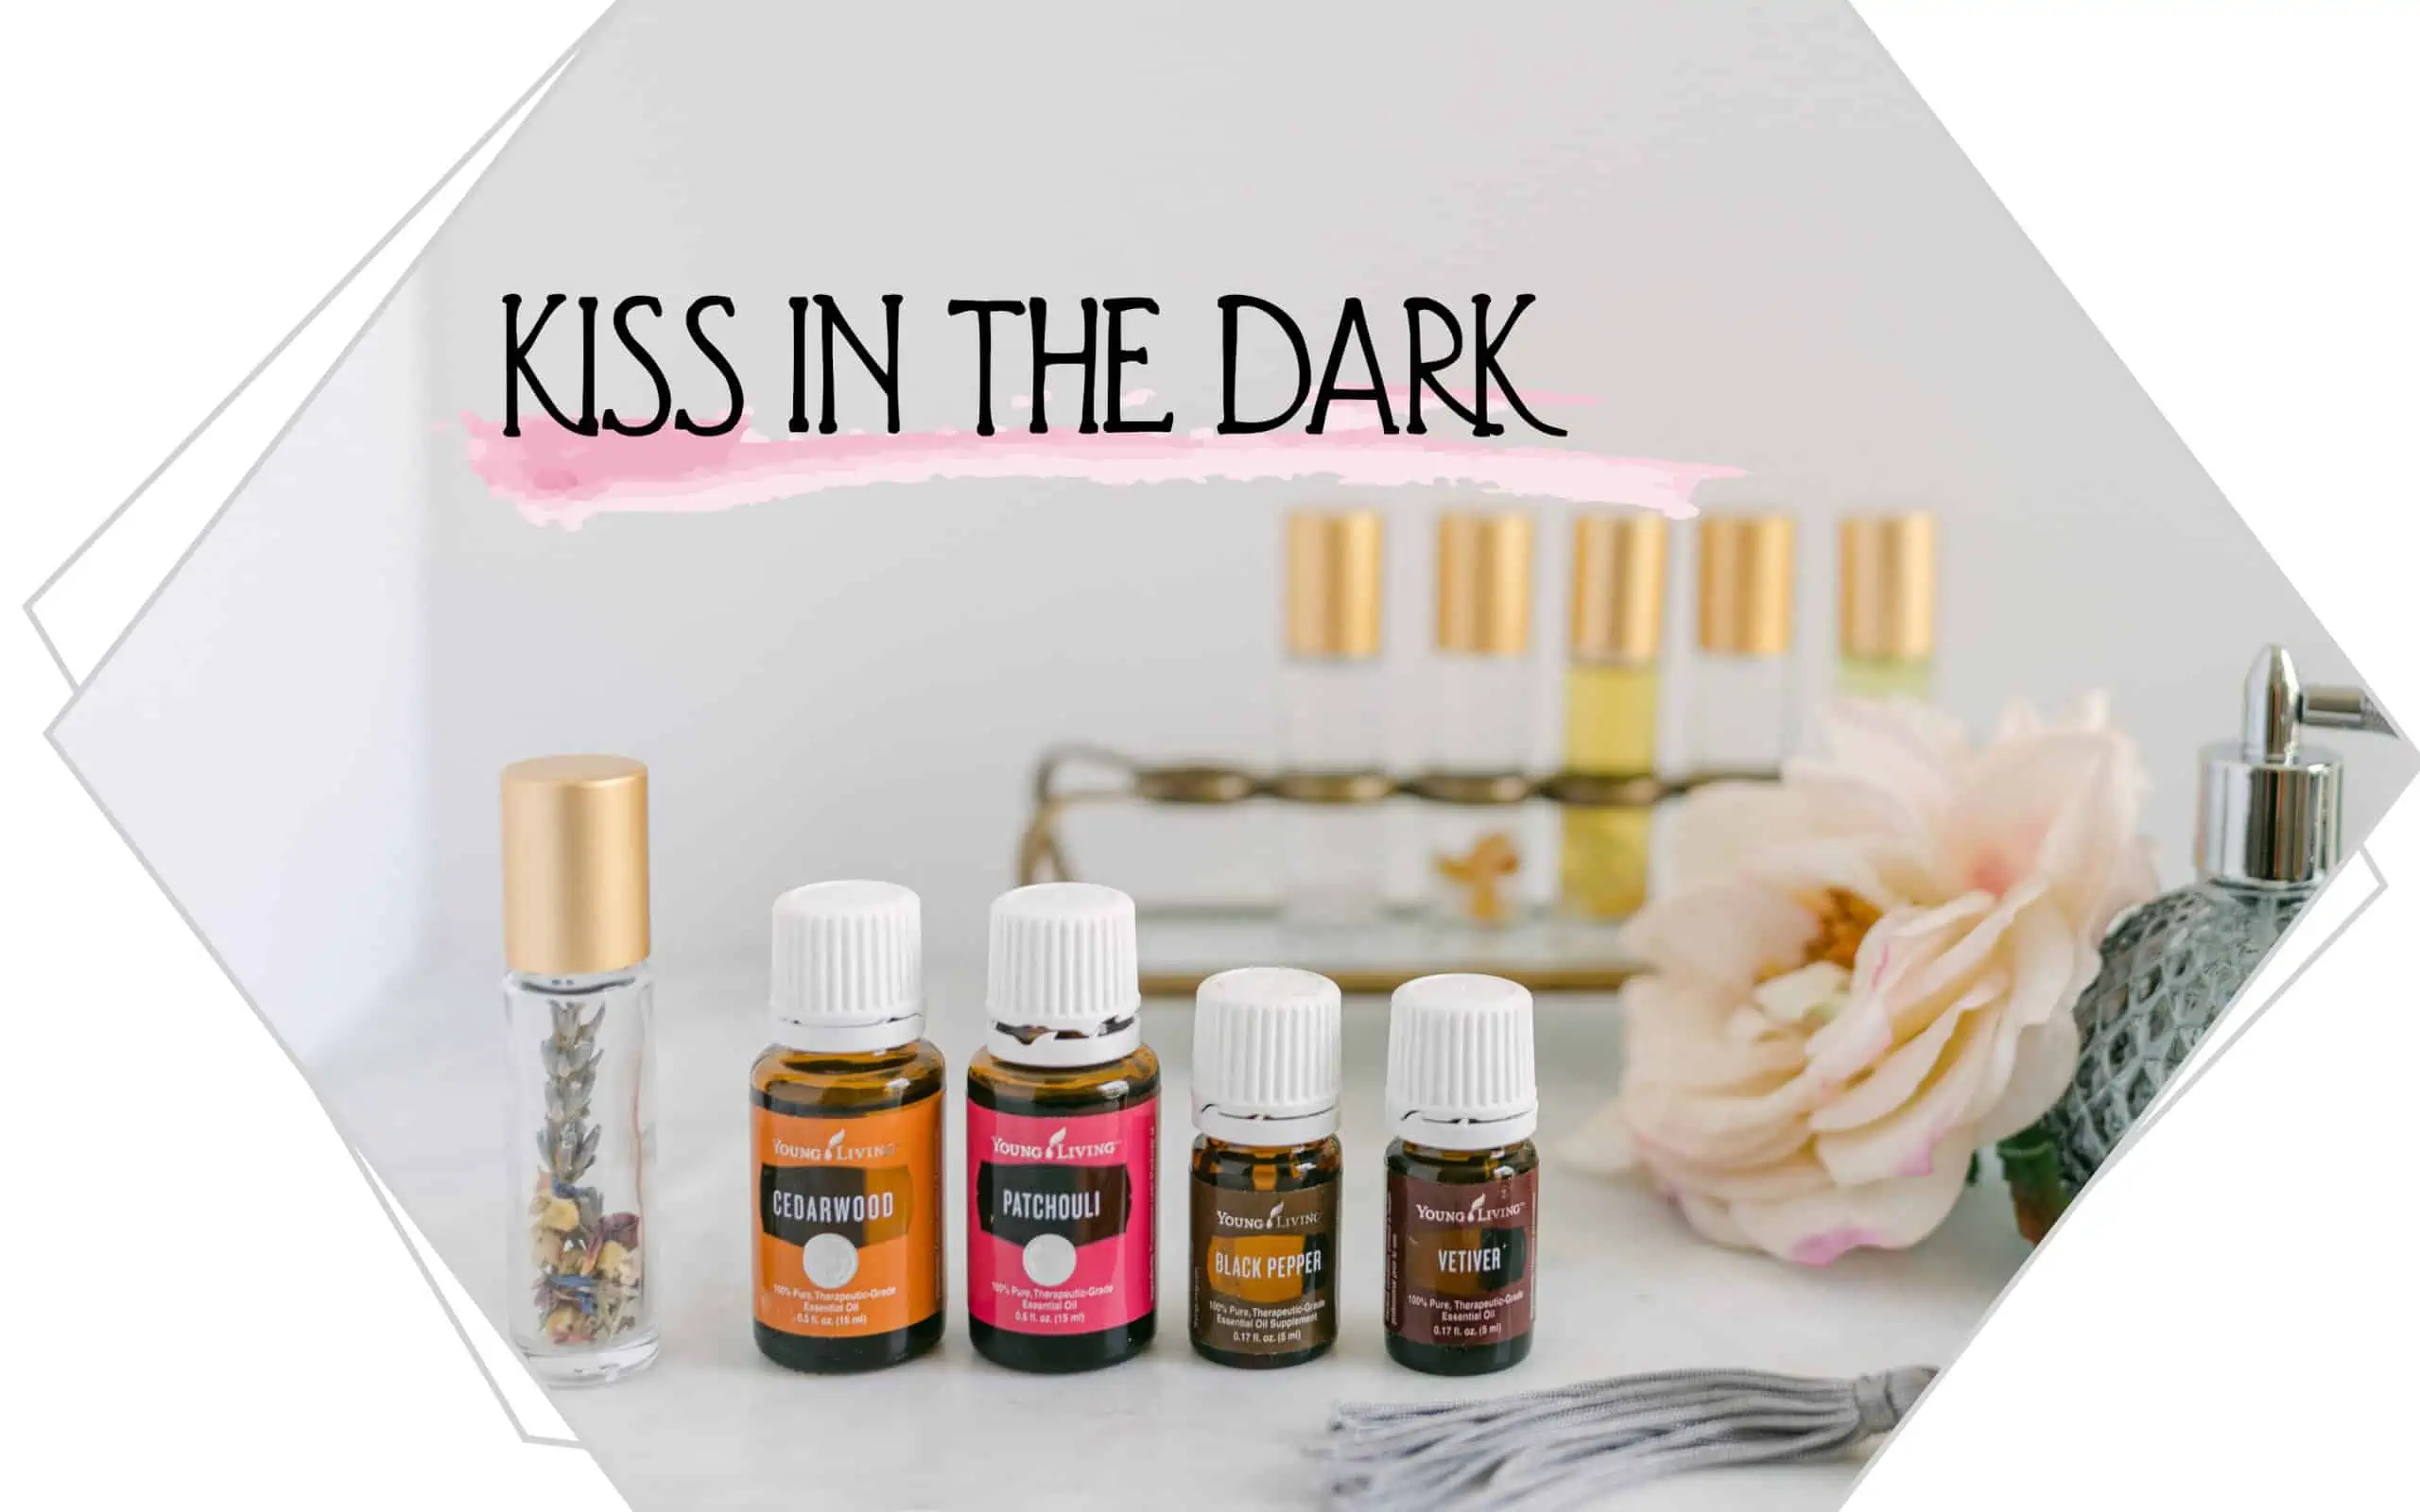 Kiss the Dark mixture with essential oils.